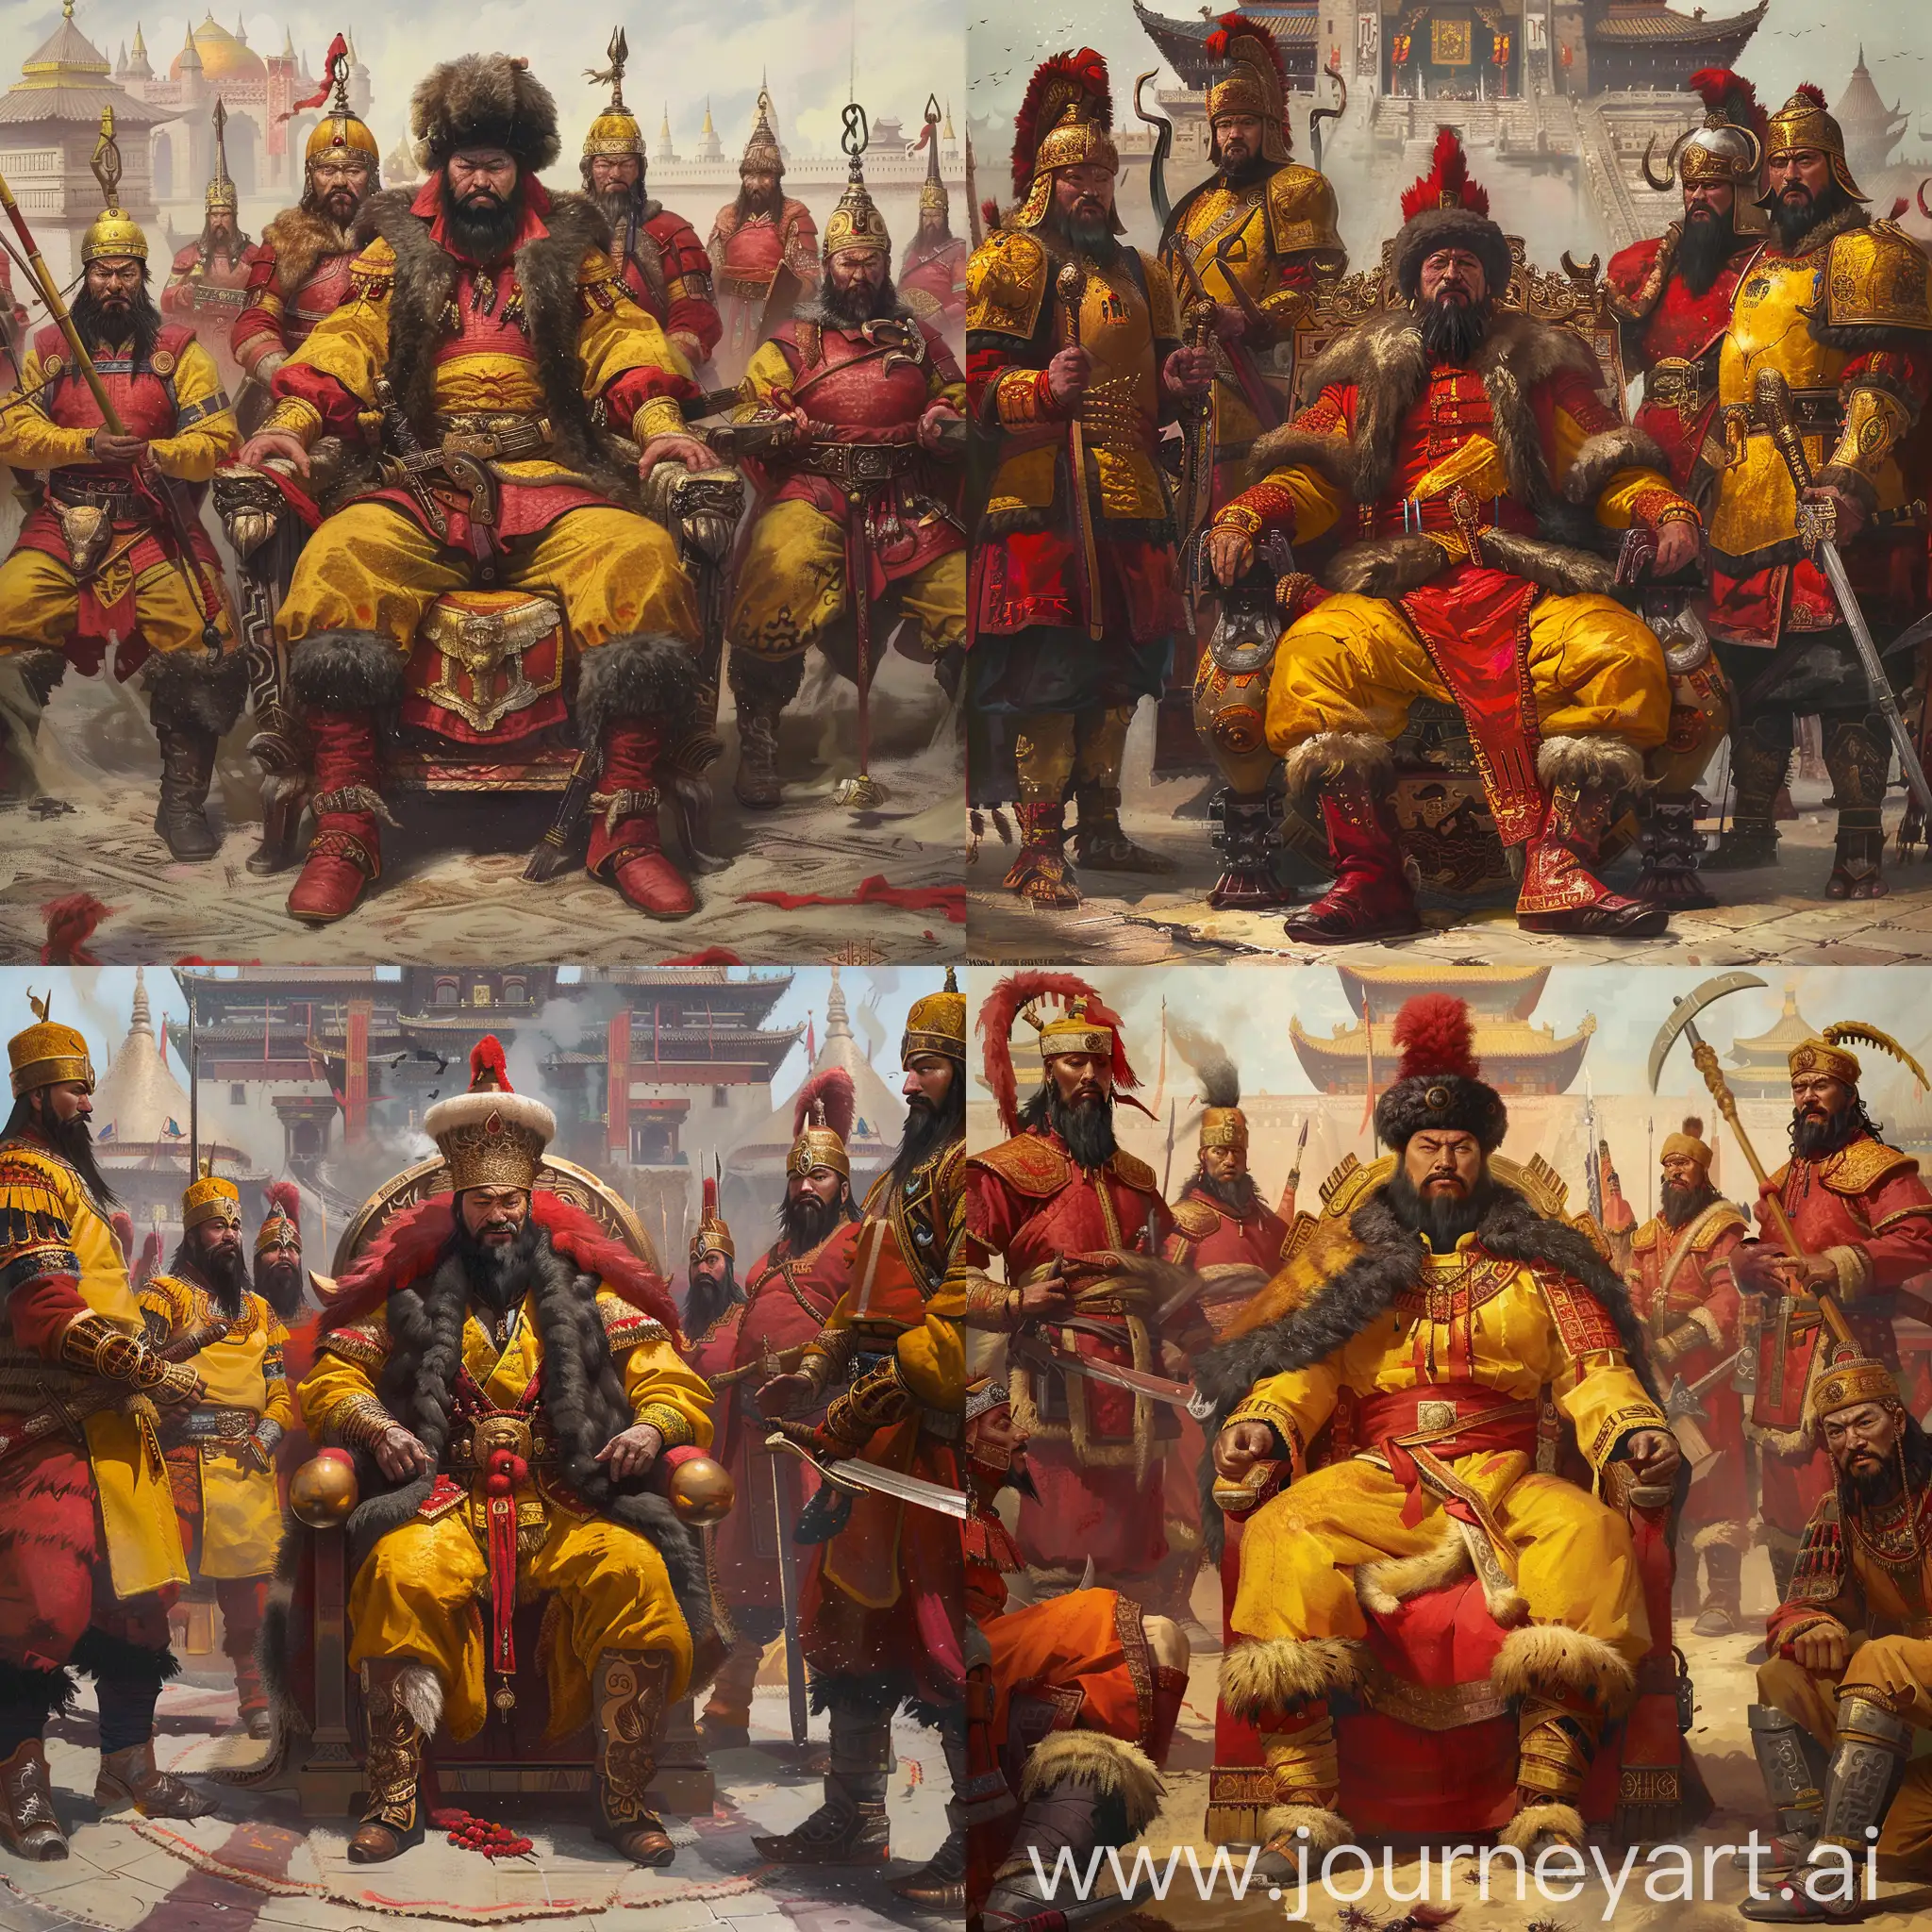 Painting mode:

a middle-aged medieval Mongol Khan is sitting on his imperial throne in the middle, he has black Mongol style beard, red-yellow Mongol Khan imperial fur hat and fur costume, with boots,

other Mongol bodyguards and warriors are in red and yellow color Mongol armor, they hold curved swords or spears in hands, they have Mongol helmets and black beard, they stand around the khan, with boots,

they are all before an Mongol palace, other Mongol temples as background,